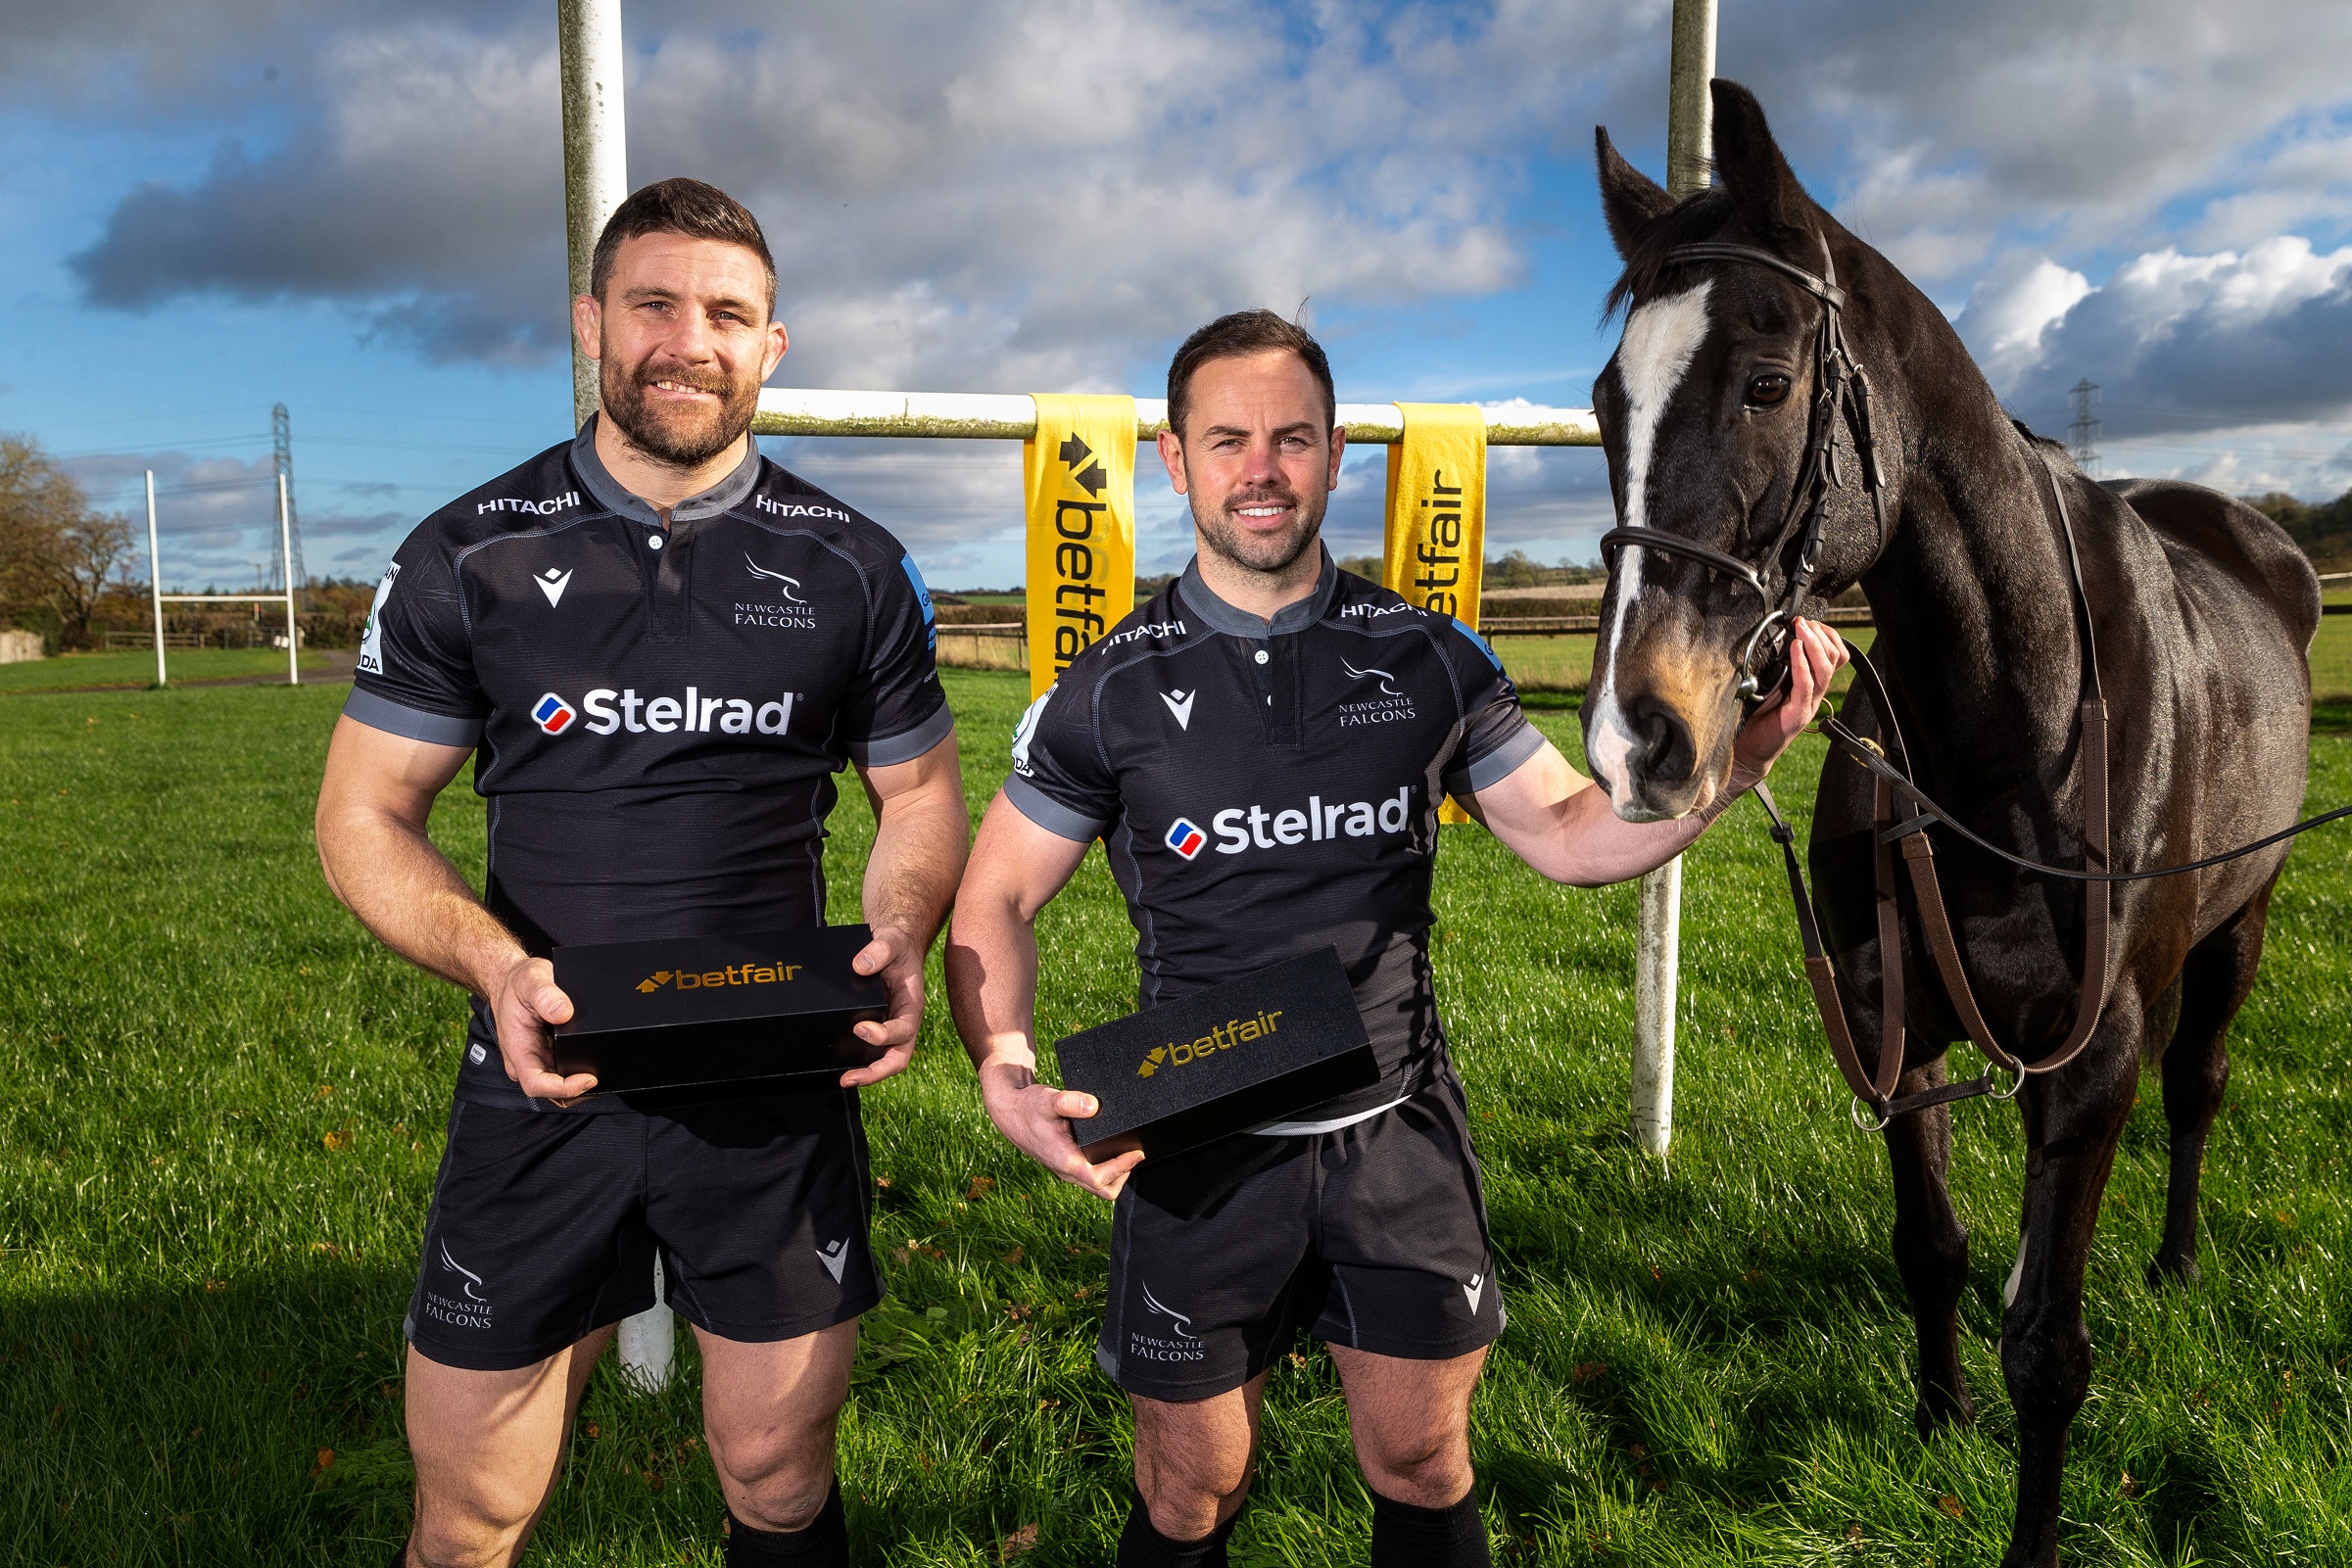 Two men and a black horse stand in front of rugby goal posts in a field of bright lush green grass. The rugby players aredressing in black and grey rugby kit and one is holding onto the horse.